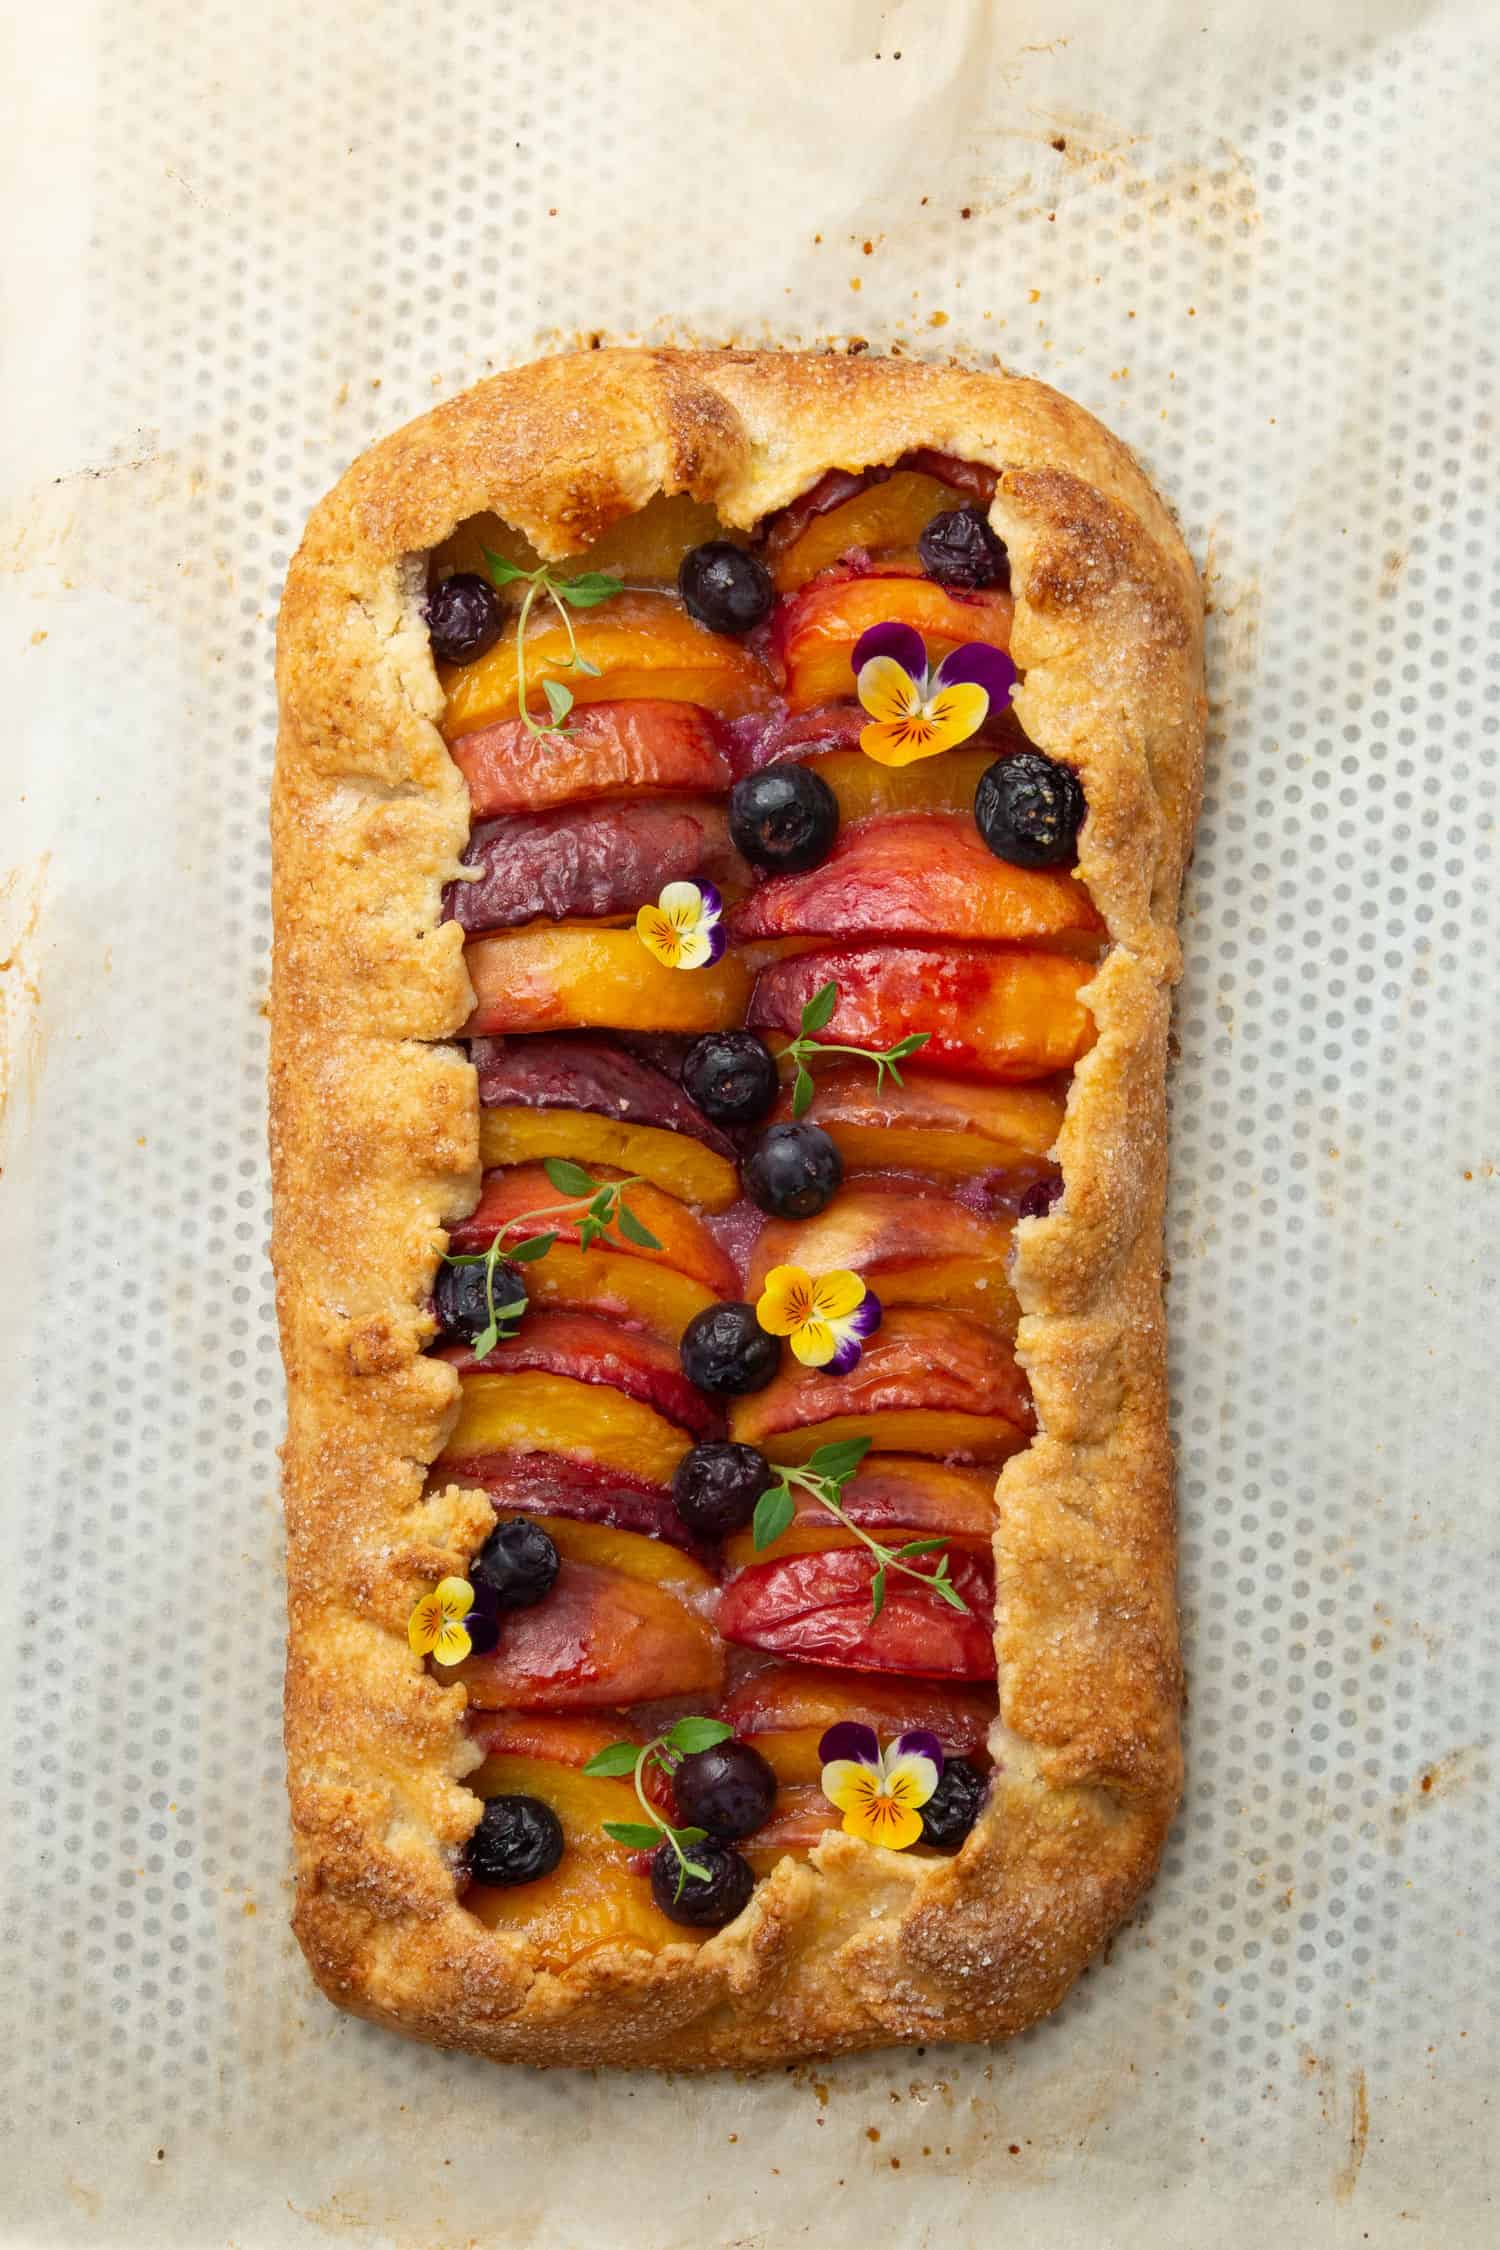 Baked and decorated Peach galette on a baking tray.